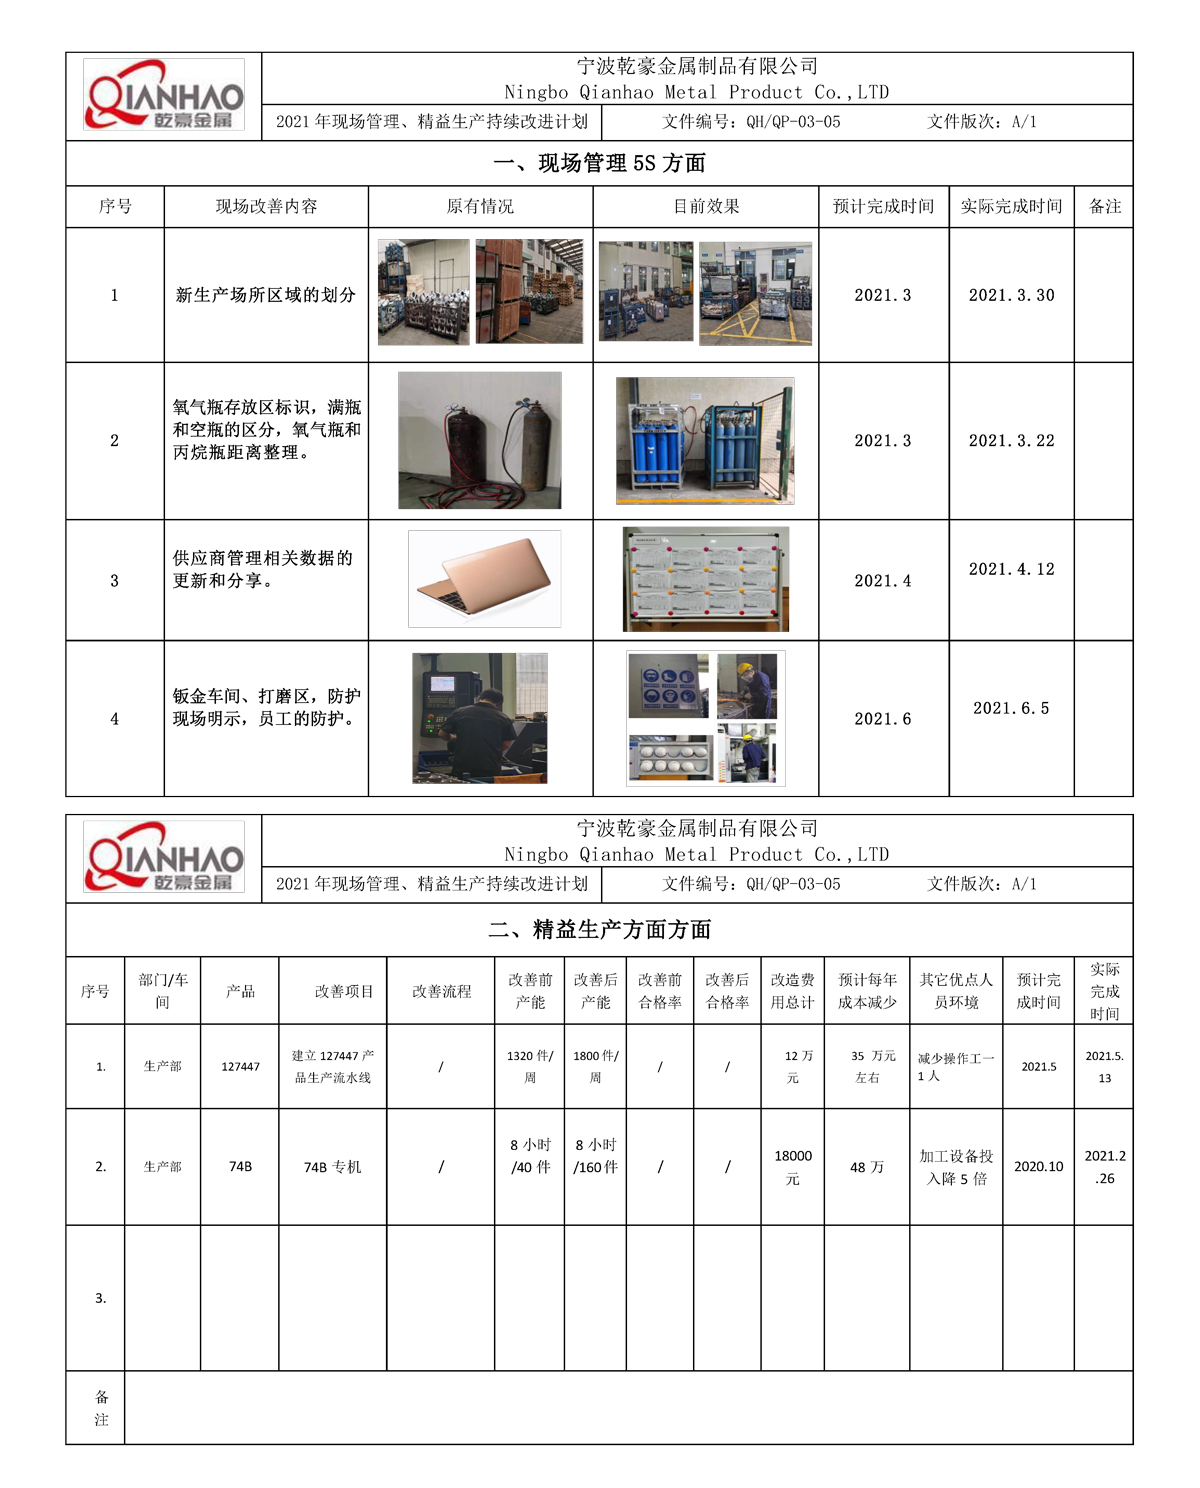 Lean Manufacturing Continuous Improvement Plan Overall Equipment Effectiveness Details…(图1)